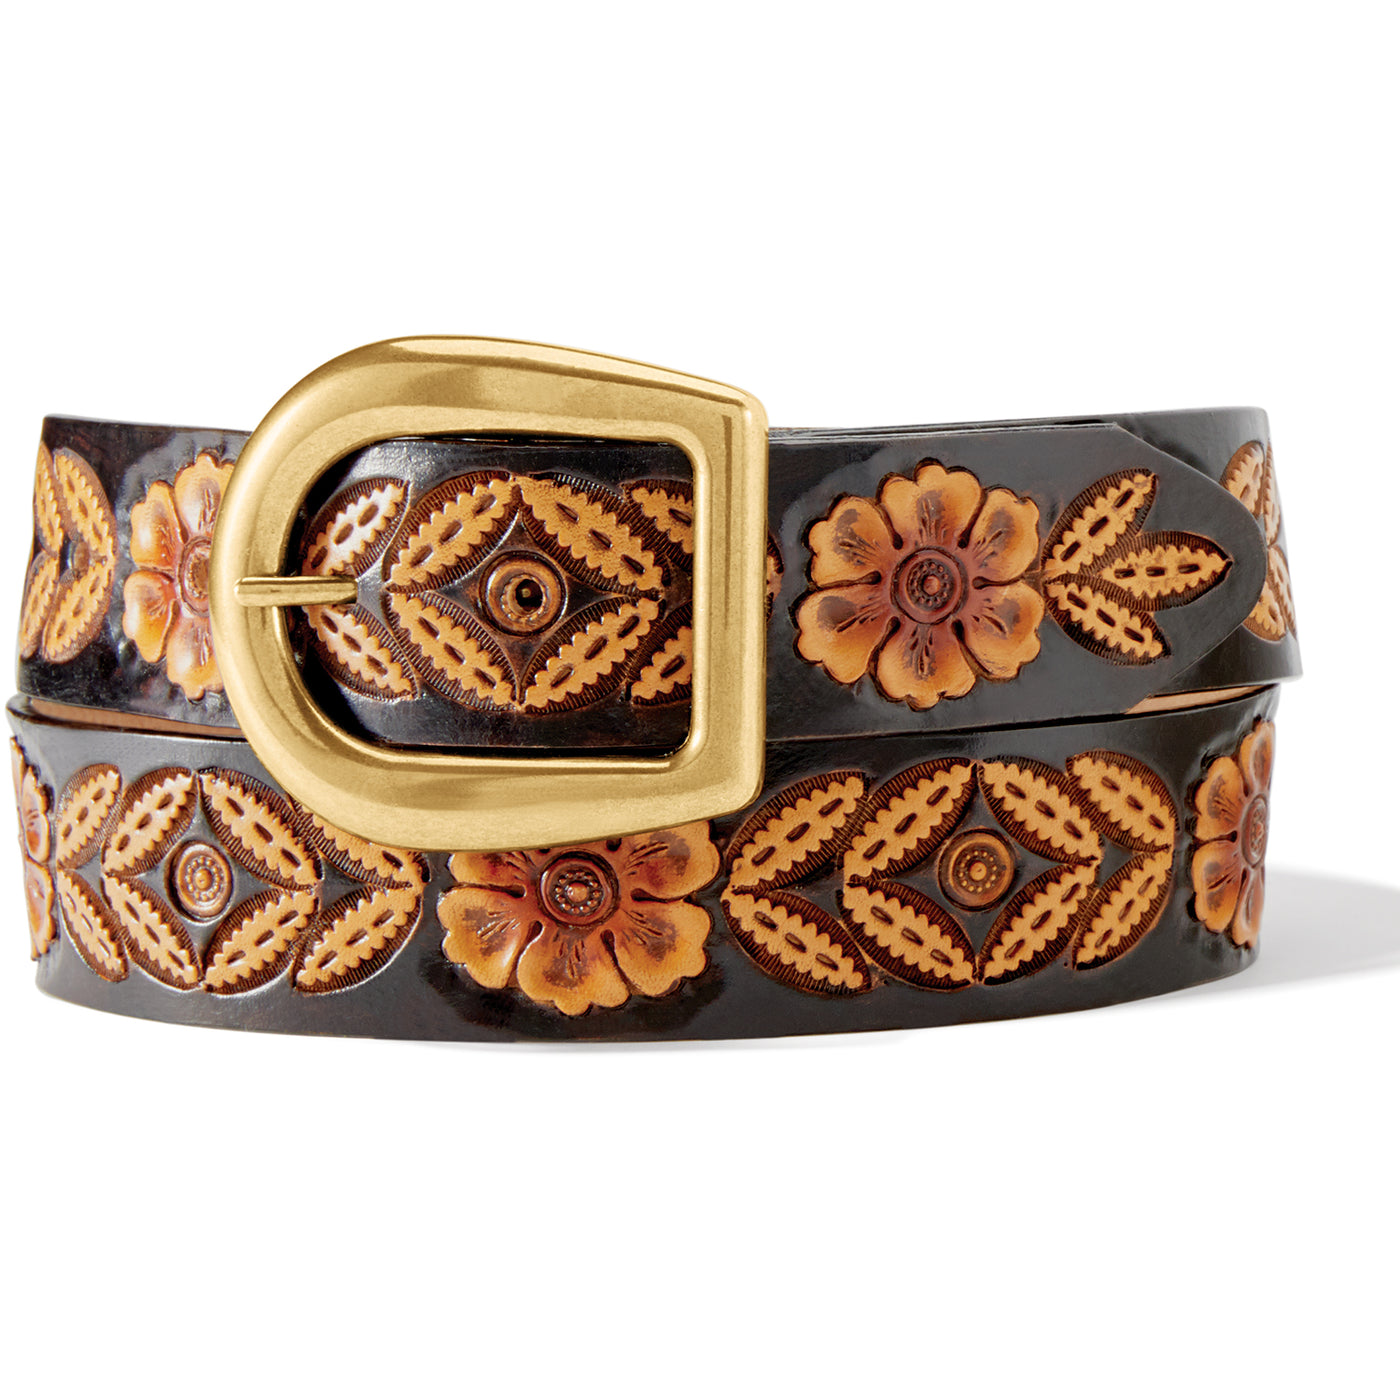 Named for our Western belt designer’s daughter, this two-tone vegetable leather belt with high-low texture in the 70's influenced embossed detailing and colors finished one by one by our artisans in LA makes a great jean belt. It's 1 1/2" wide and includes snaps for easy buckle change. The buckle is a center bar style made of brass, A classy retro look for anyone! A steal at this price!! Made in USA by Brighton for Tony Lama. Available at our Smyrna, TN shop.